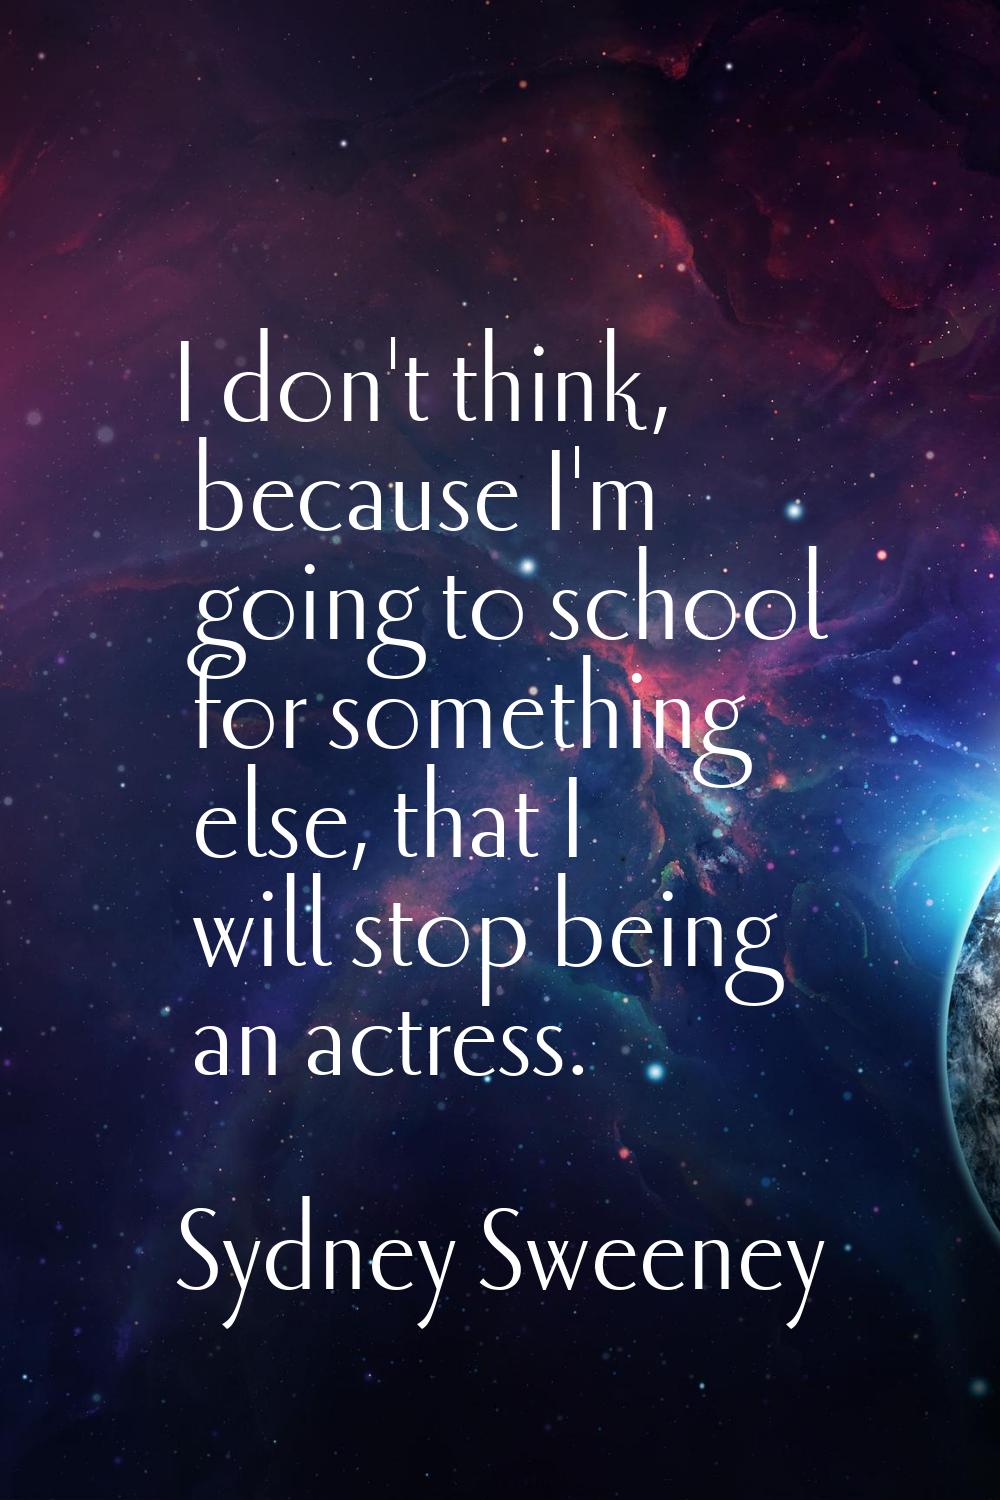 I don't think, because I'm going to school for something else, that I will stop being an actress.